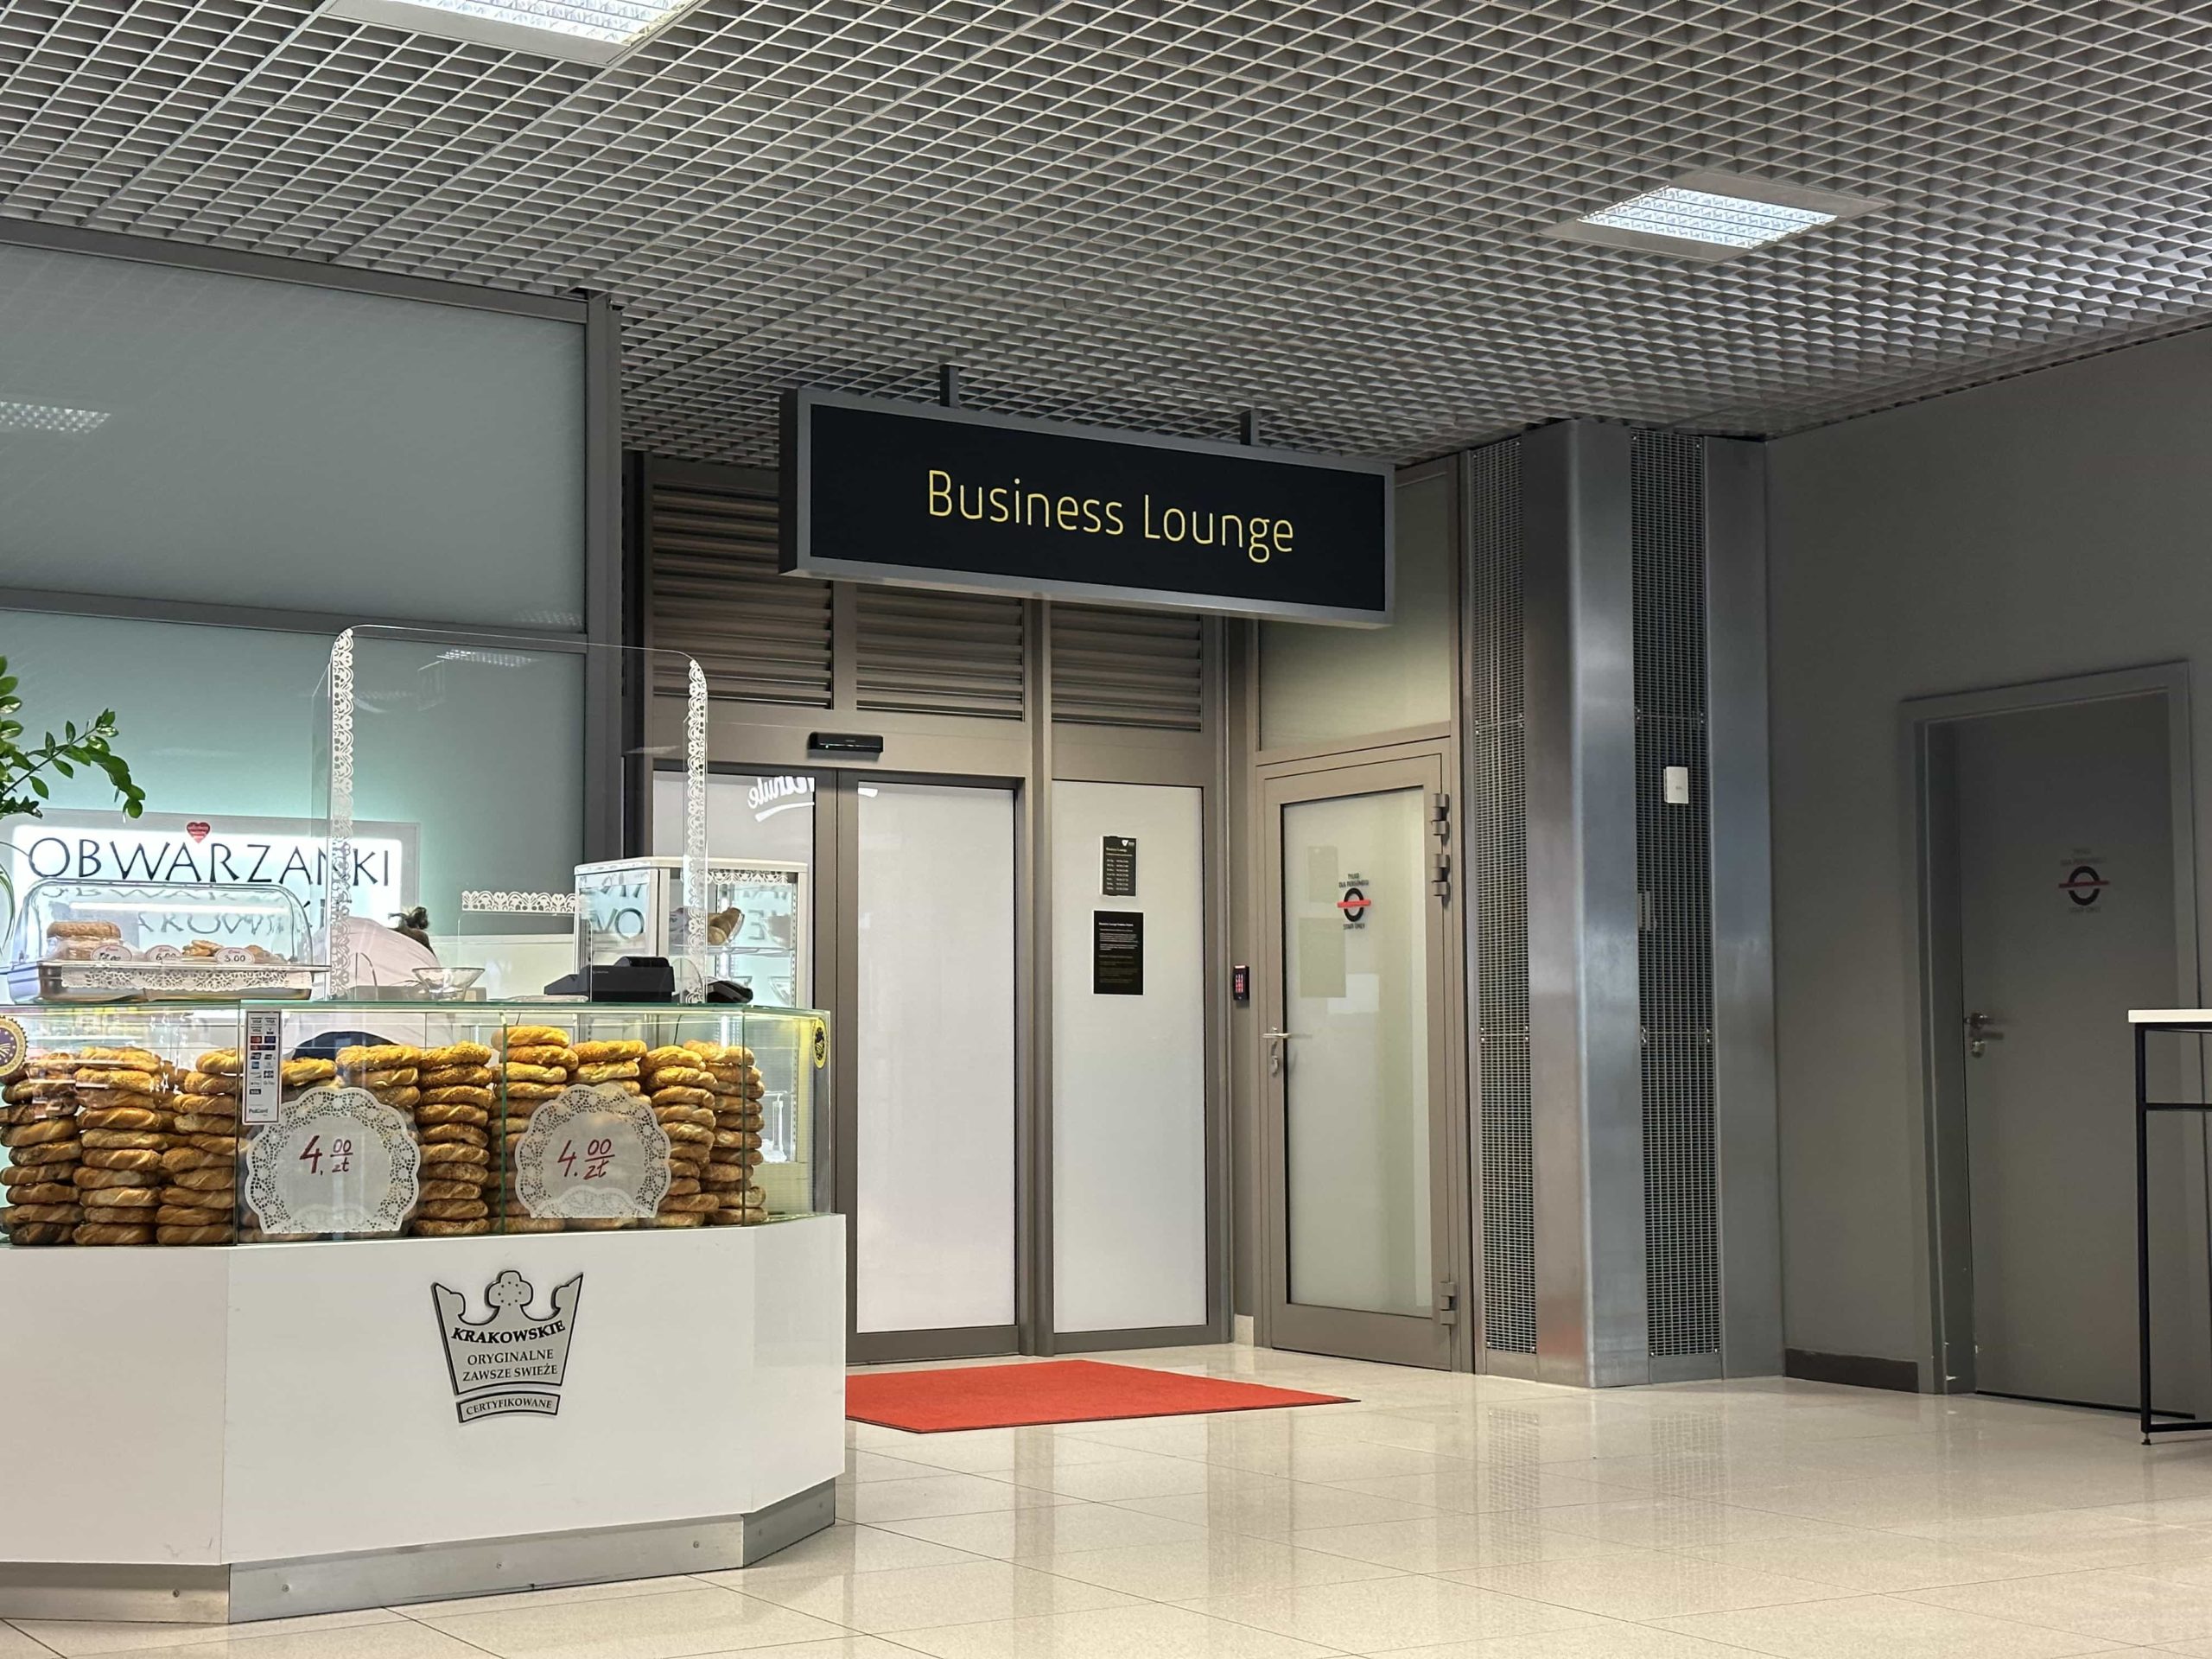 An unassuming entrance to a business lounge, in a corner next to a food stall